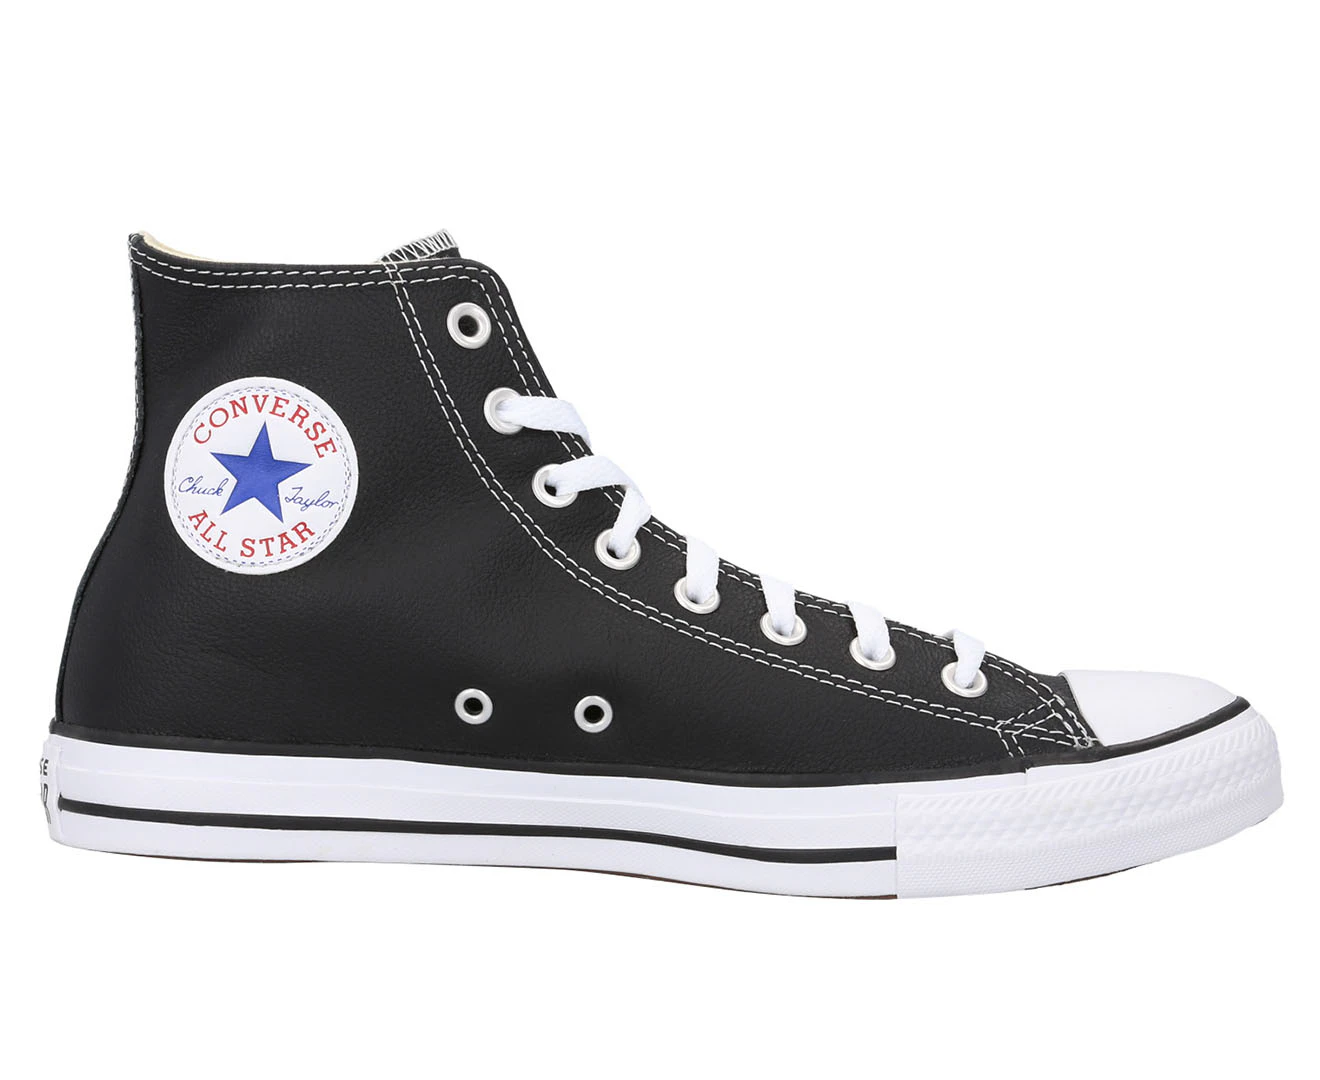 Converse Unisex Chuck Taylor All Star High Top Sneakers - Black |  